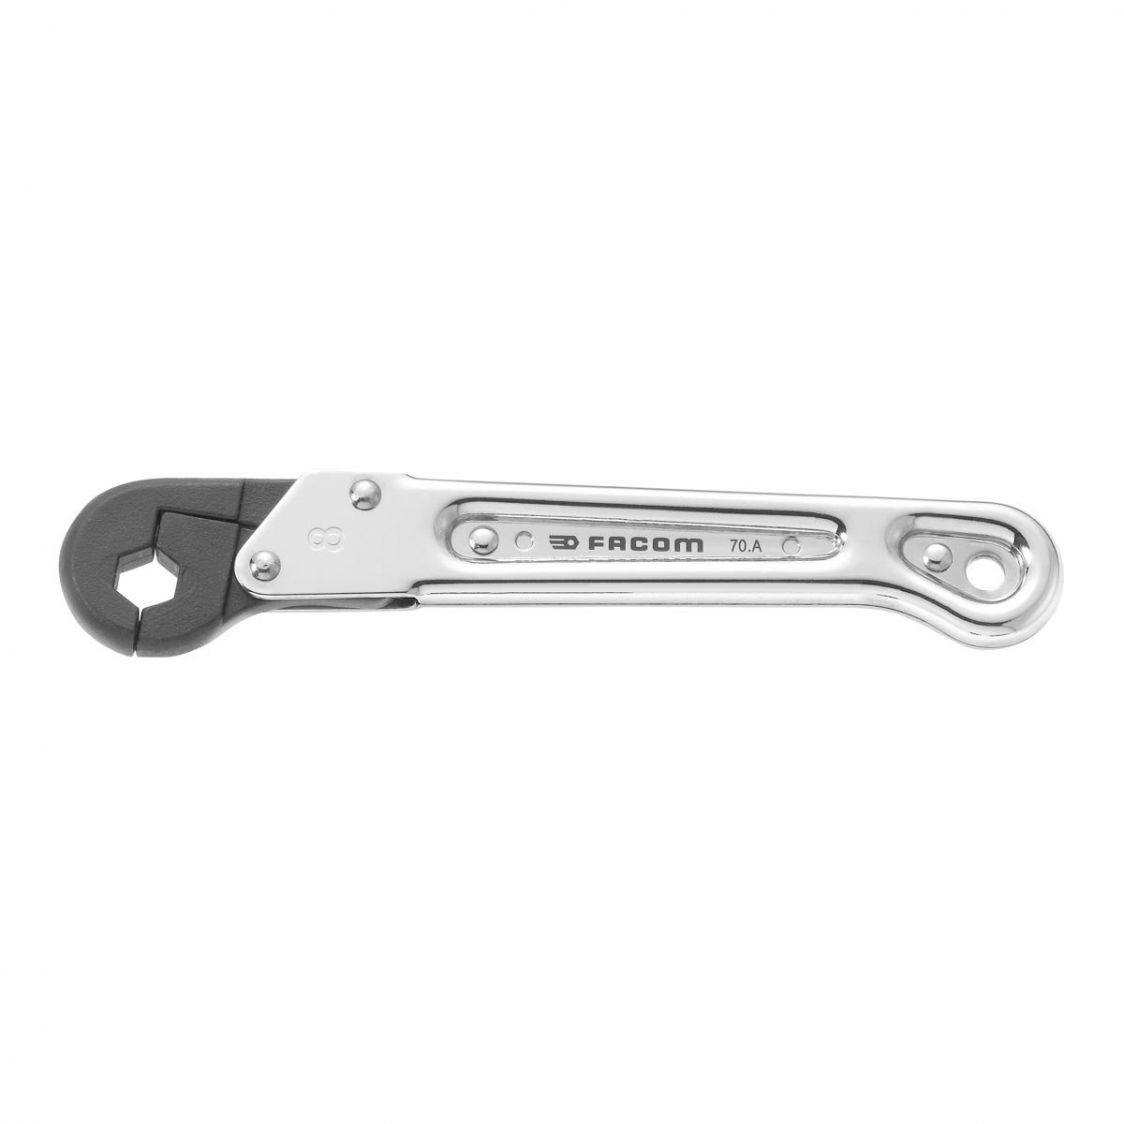 FACOM 70A.24 - 24mm Metric Ratchet Flare Nut Spanner